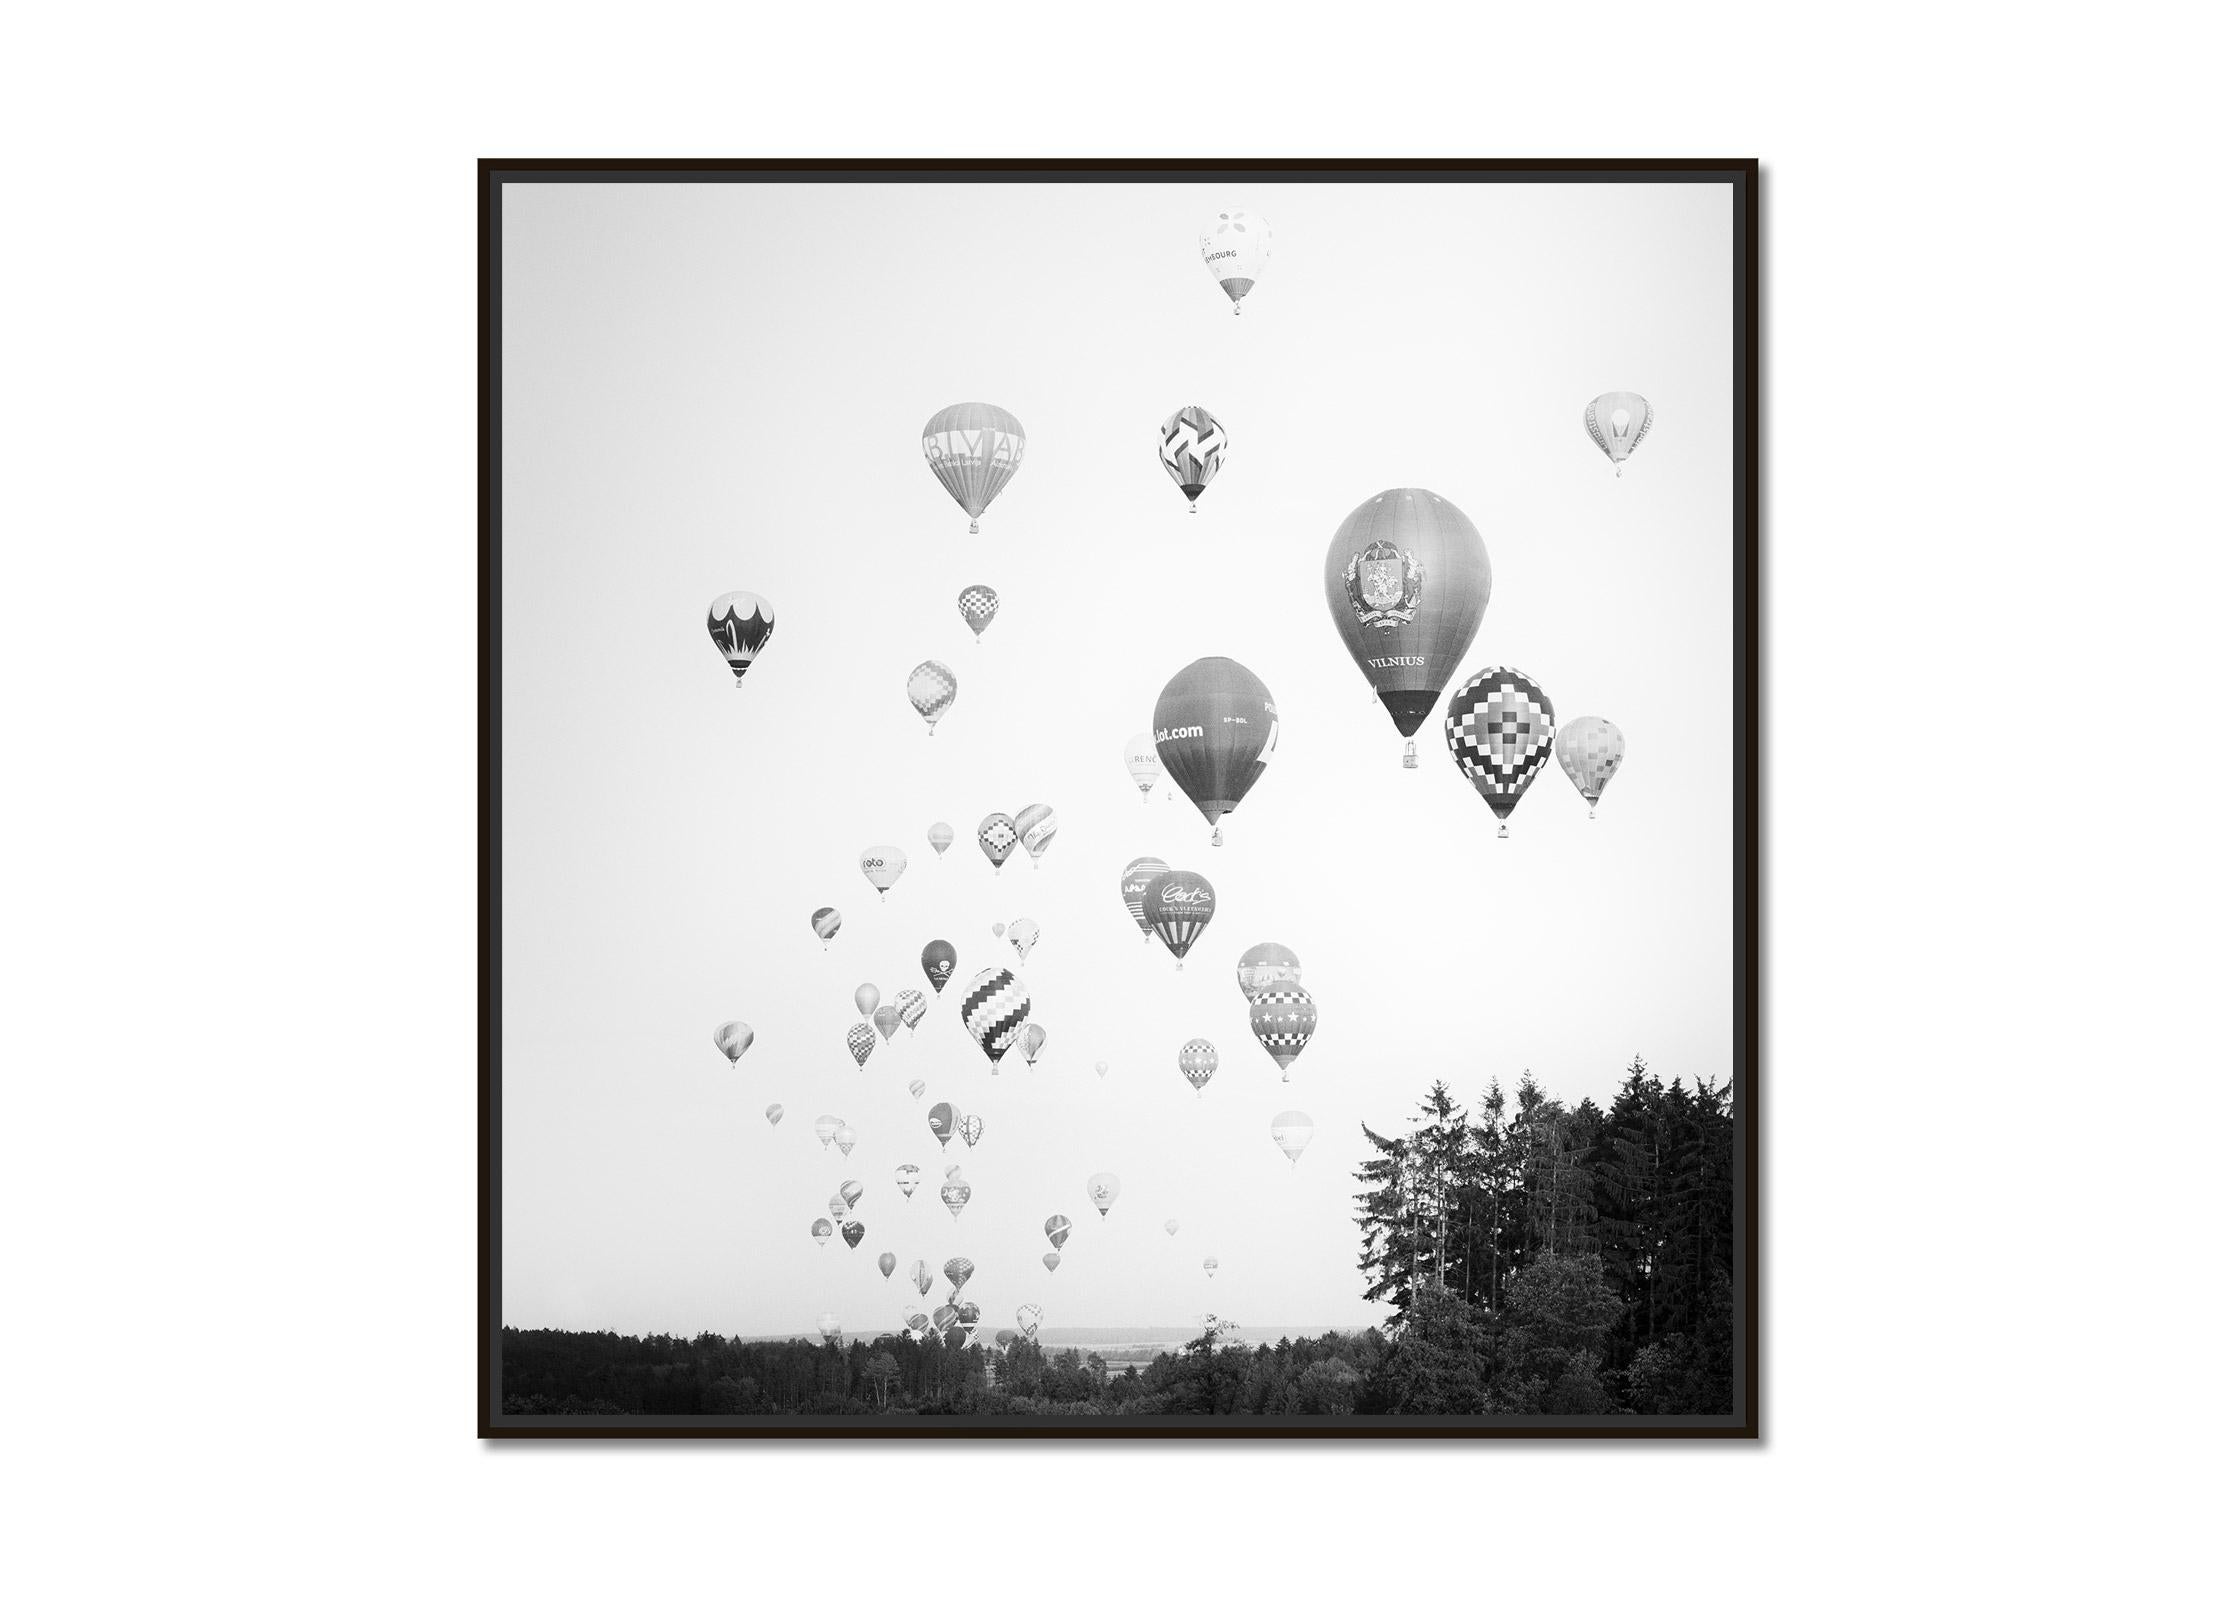 Hot Air Balloon World Championship, black and white art photography, landscape - Photograph by Gerald Berghammer, Ina Forstinger